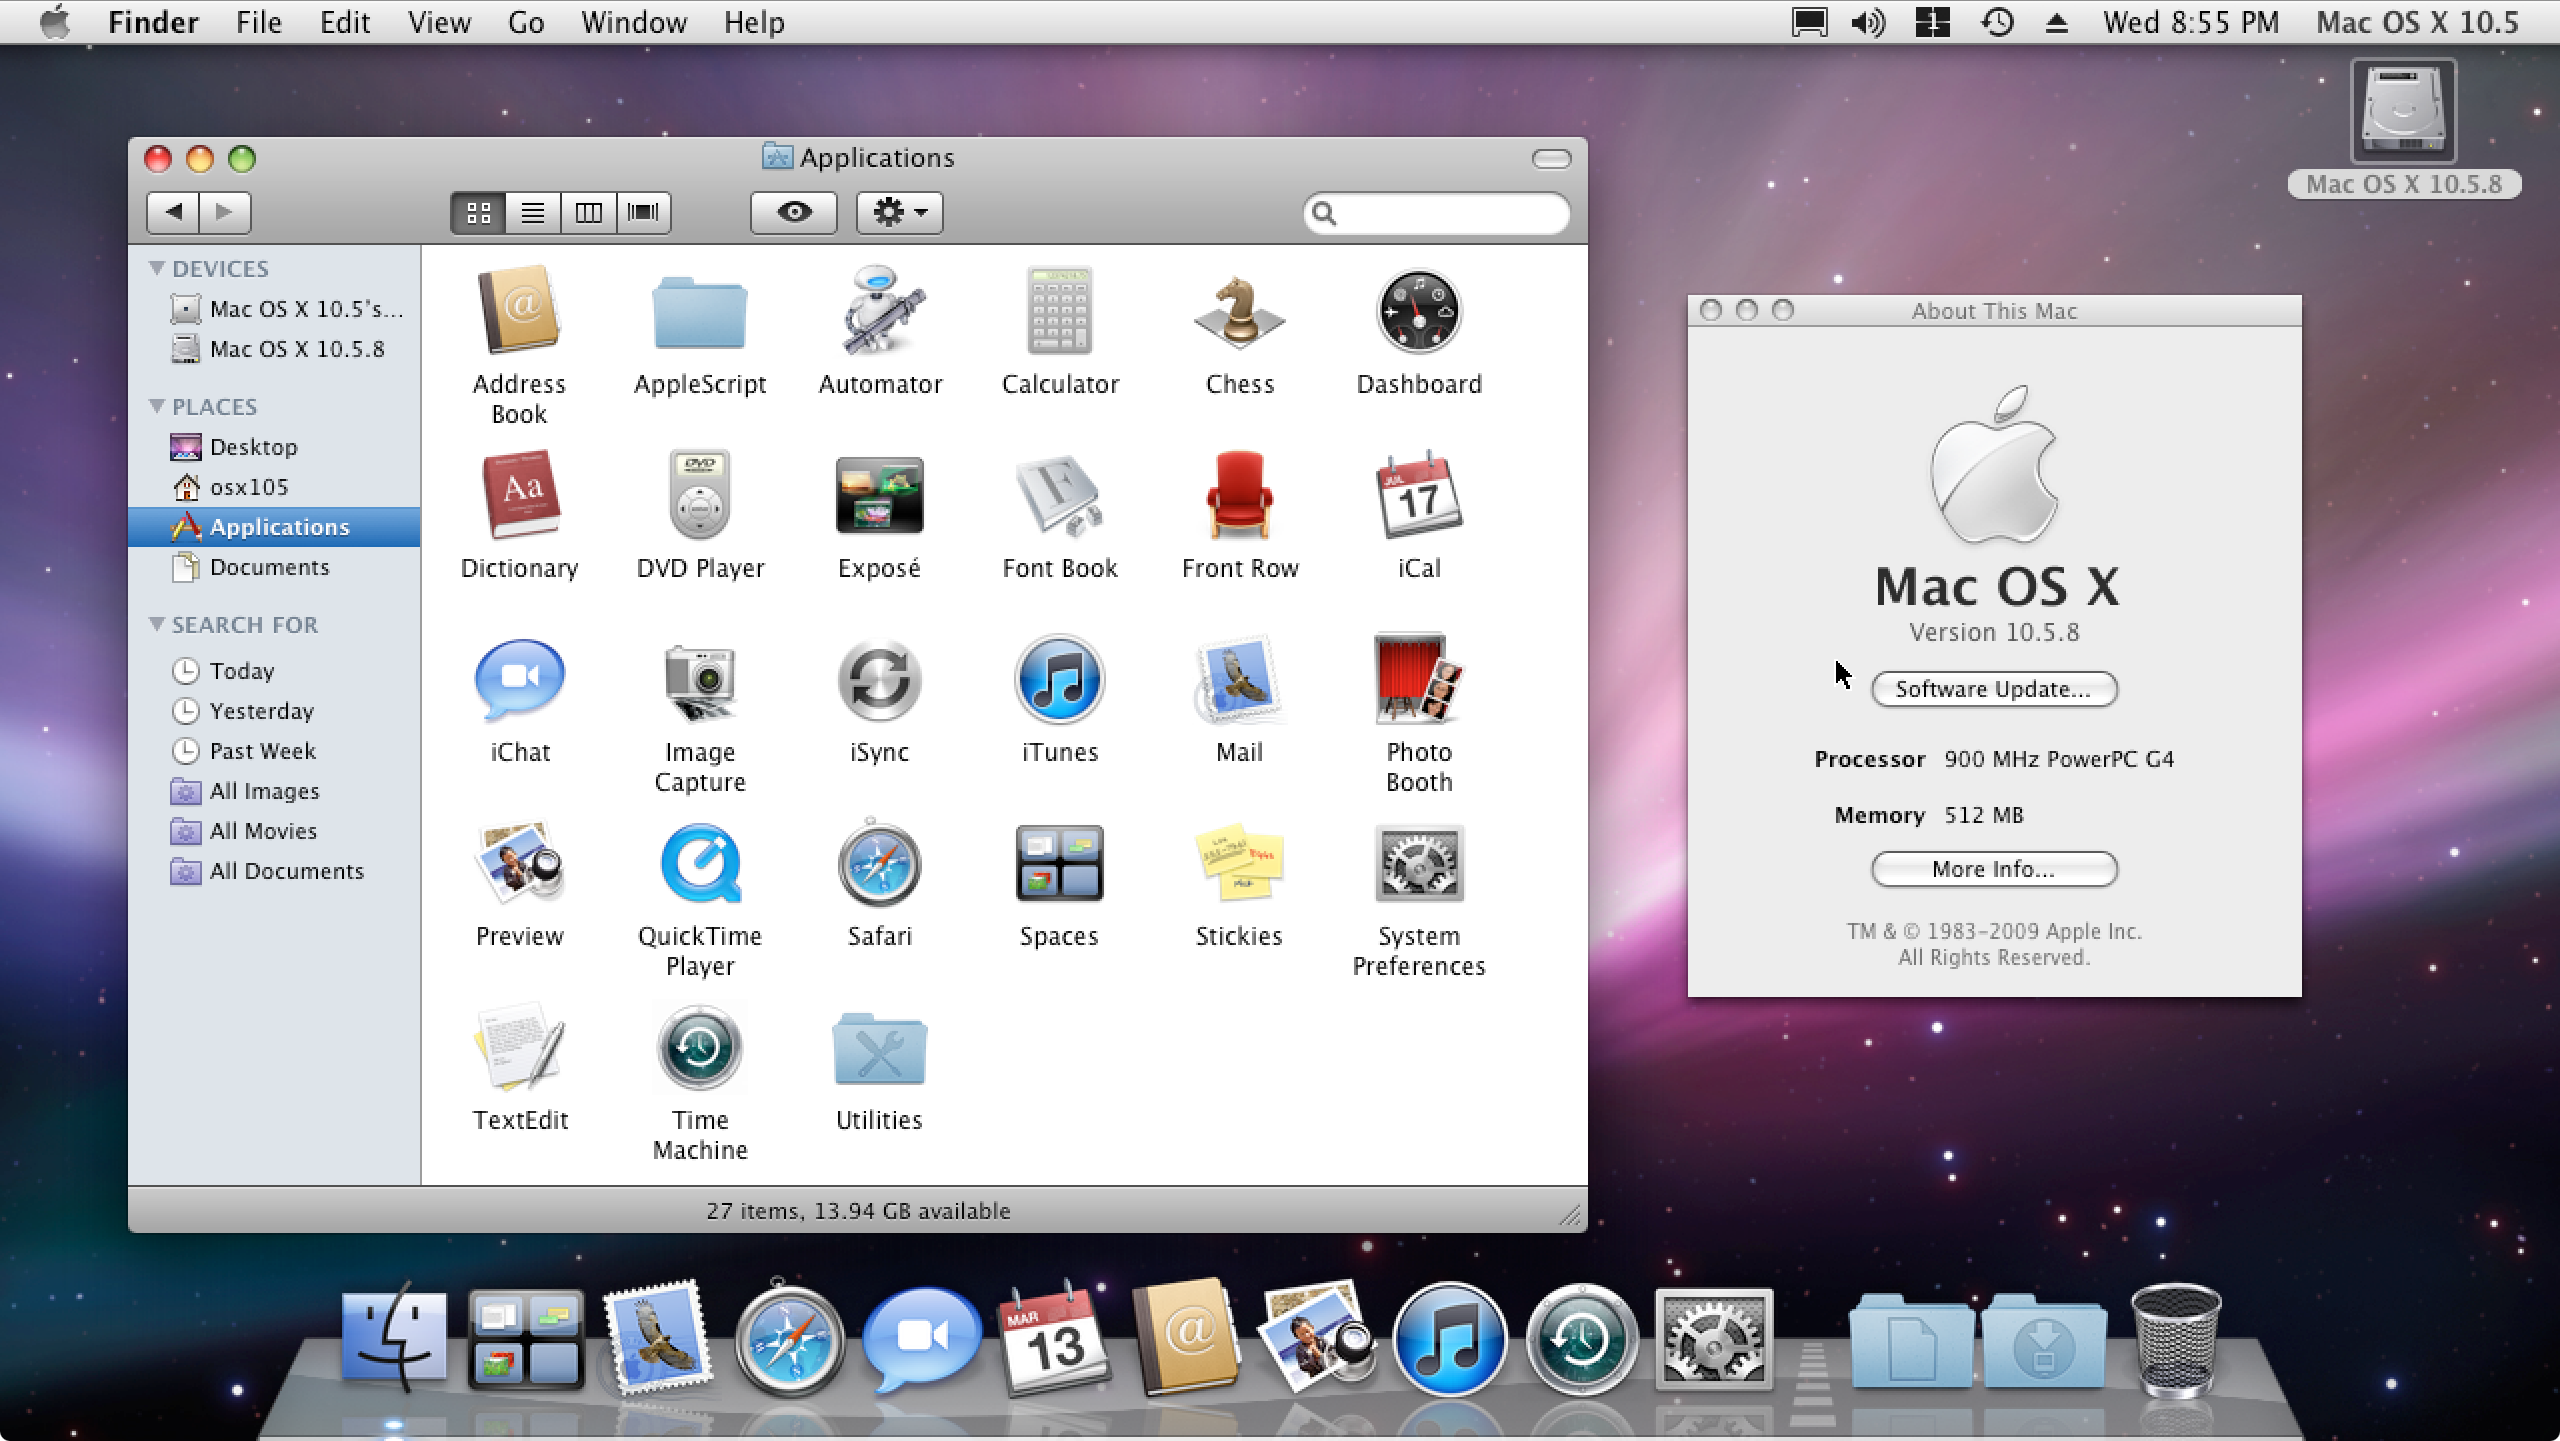 java for mac os x 10.6 update 1